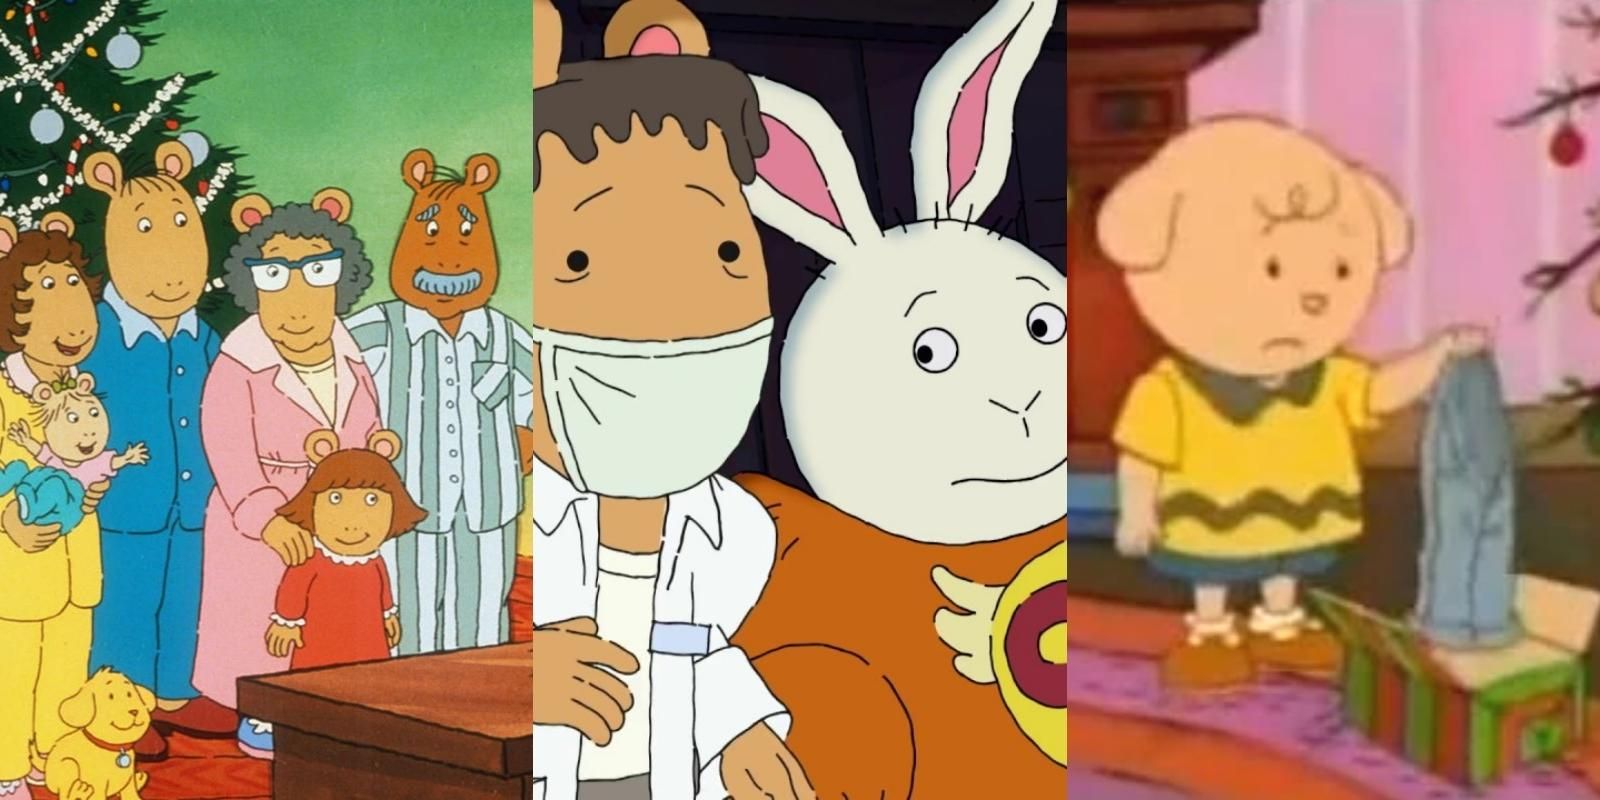 Split image of the Read family celebrating Christmas, Arthur Read and Buster Baxter on Halloween, and a Charlie Brown parody in Arthur